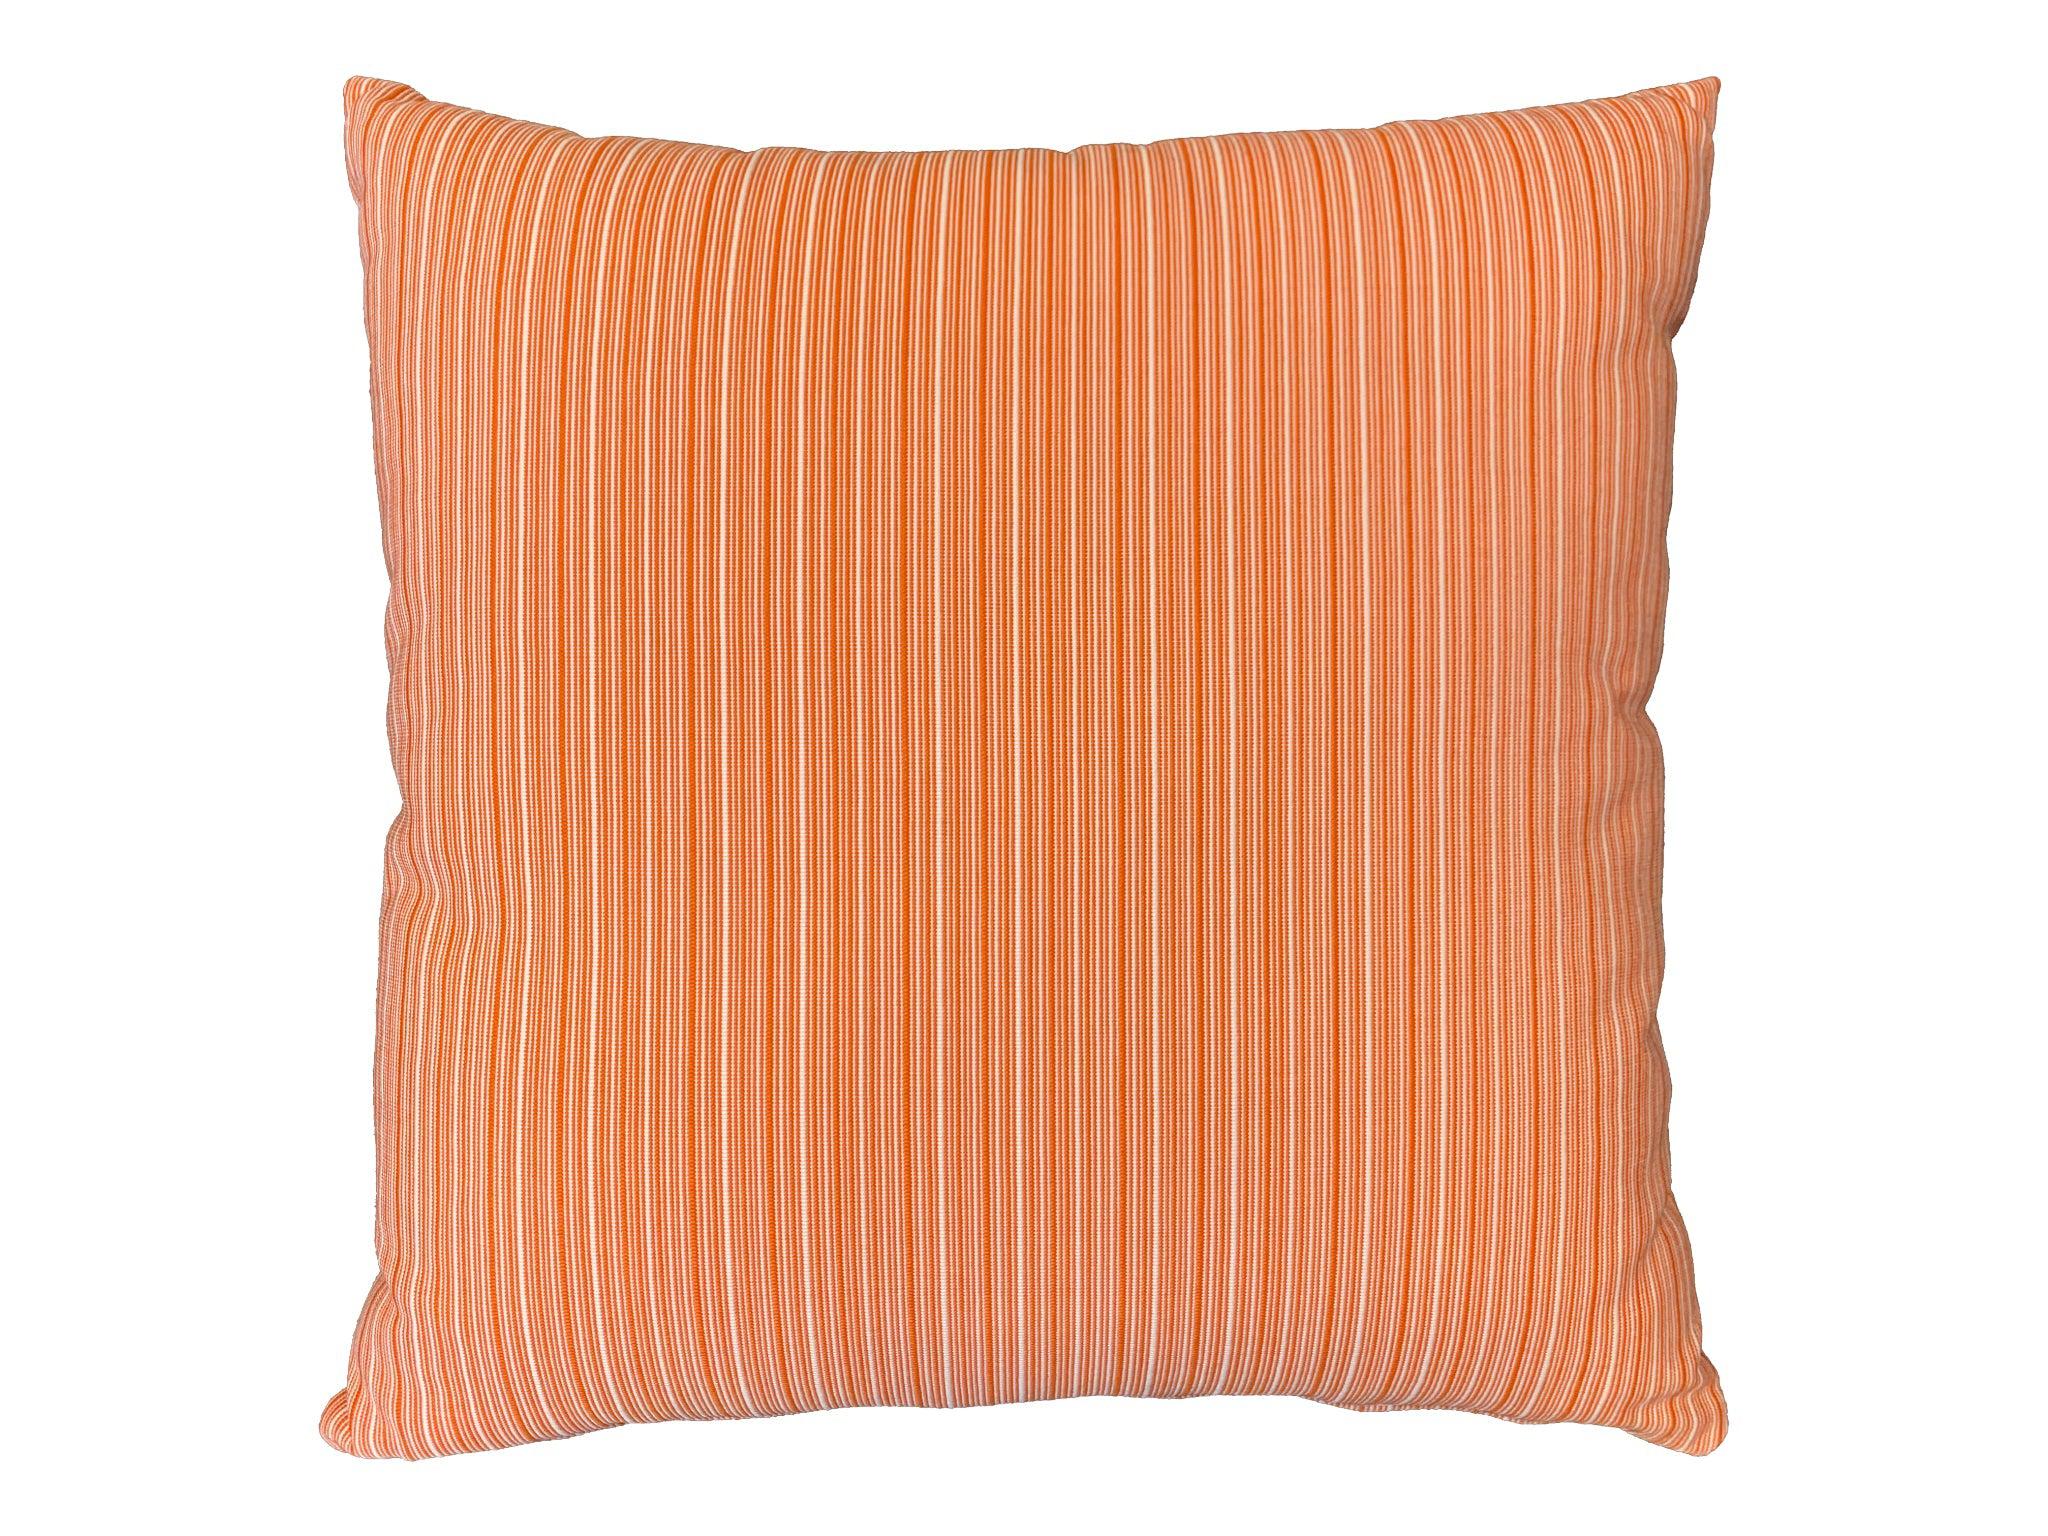 FurnitureOkay Embroidered Essential Outdoor Cushion